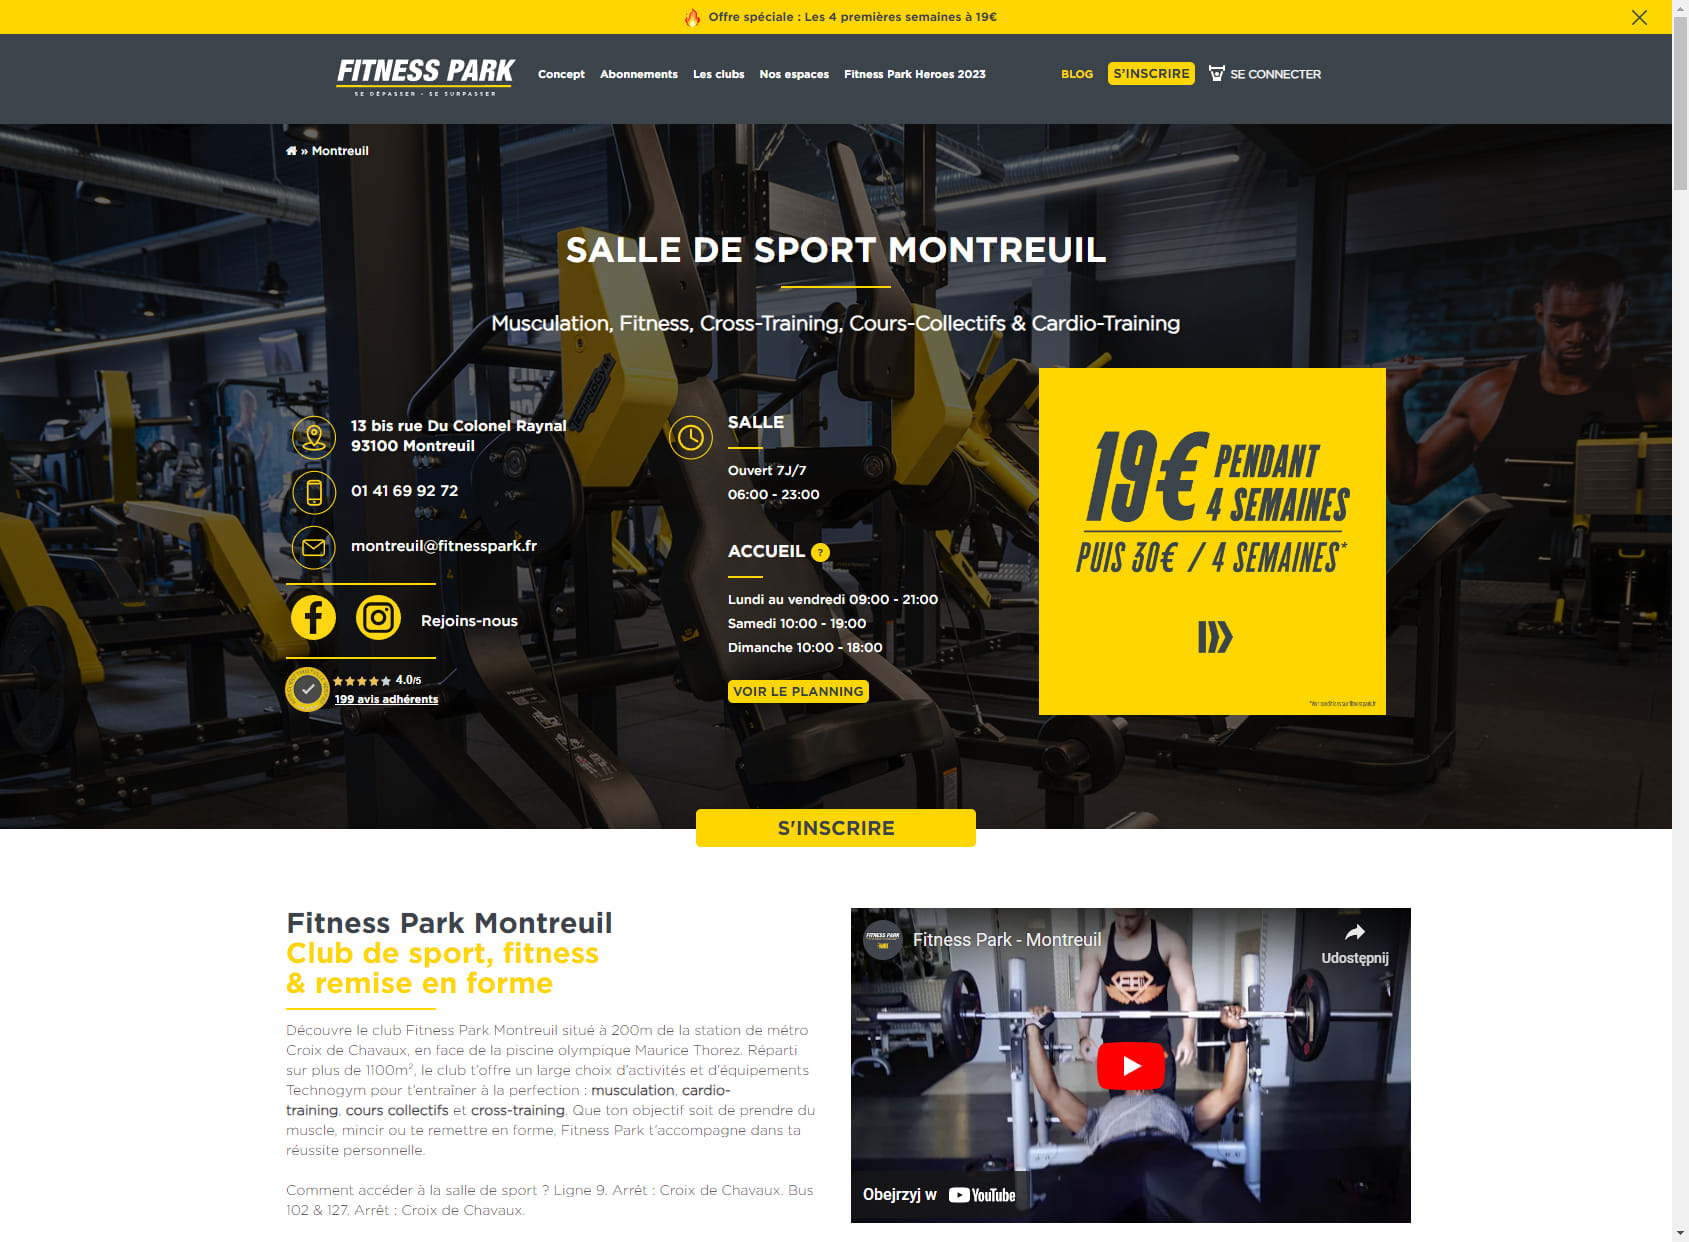 Fitness Park Montreuil